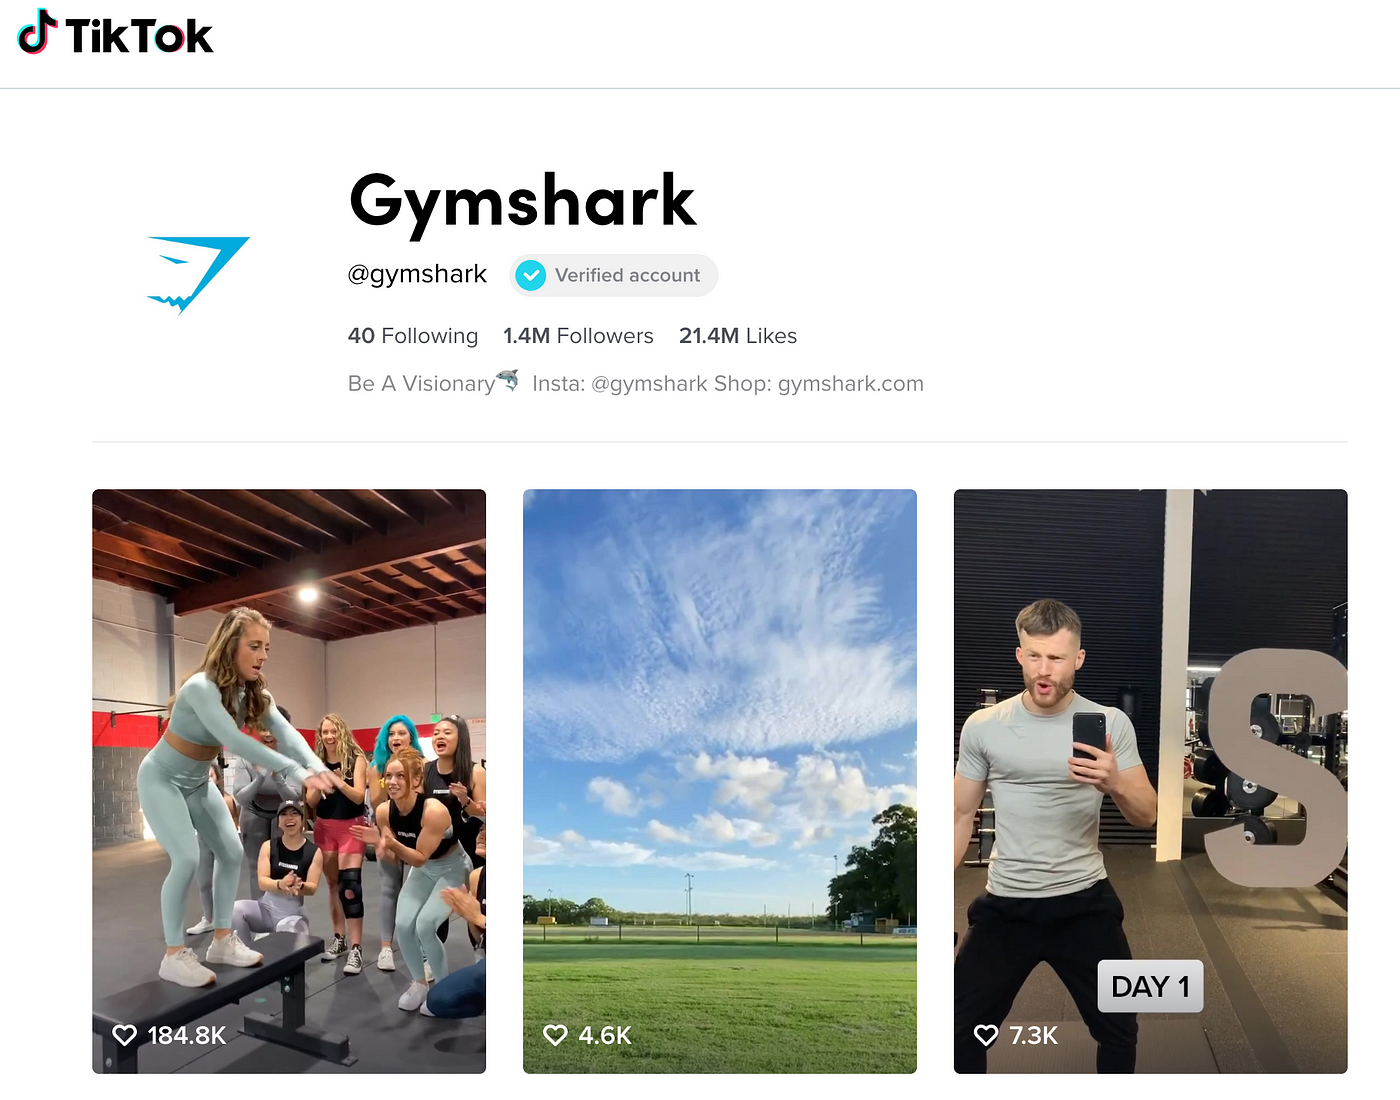 Gymshark Be a visionary. Gym, Fitness and Active Wear.